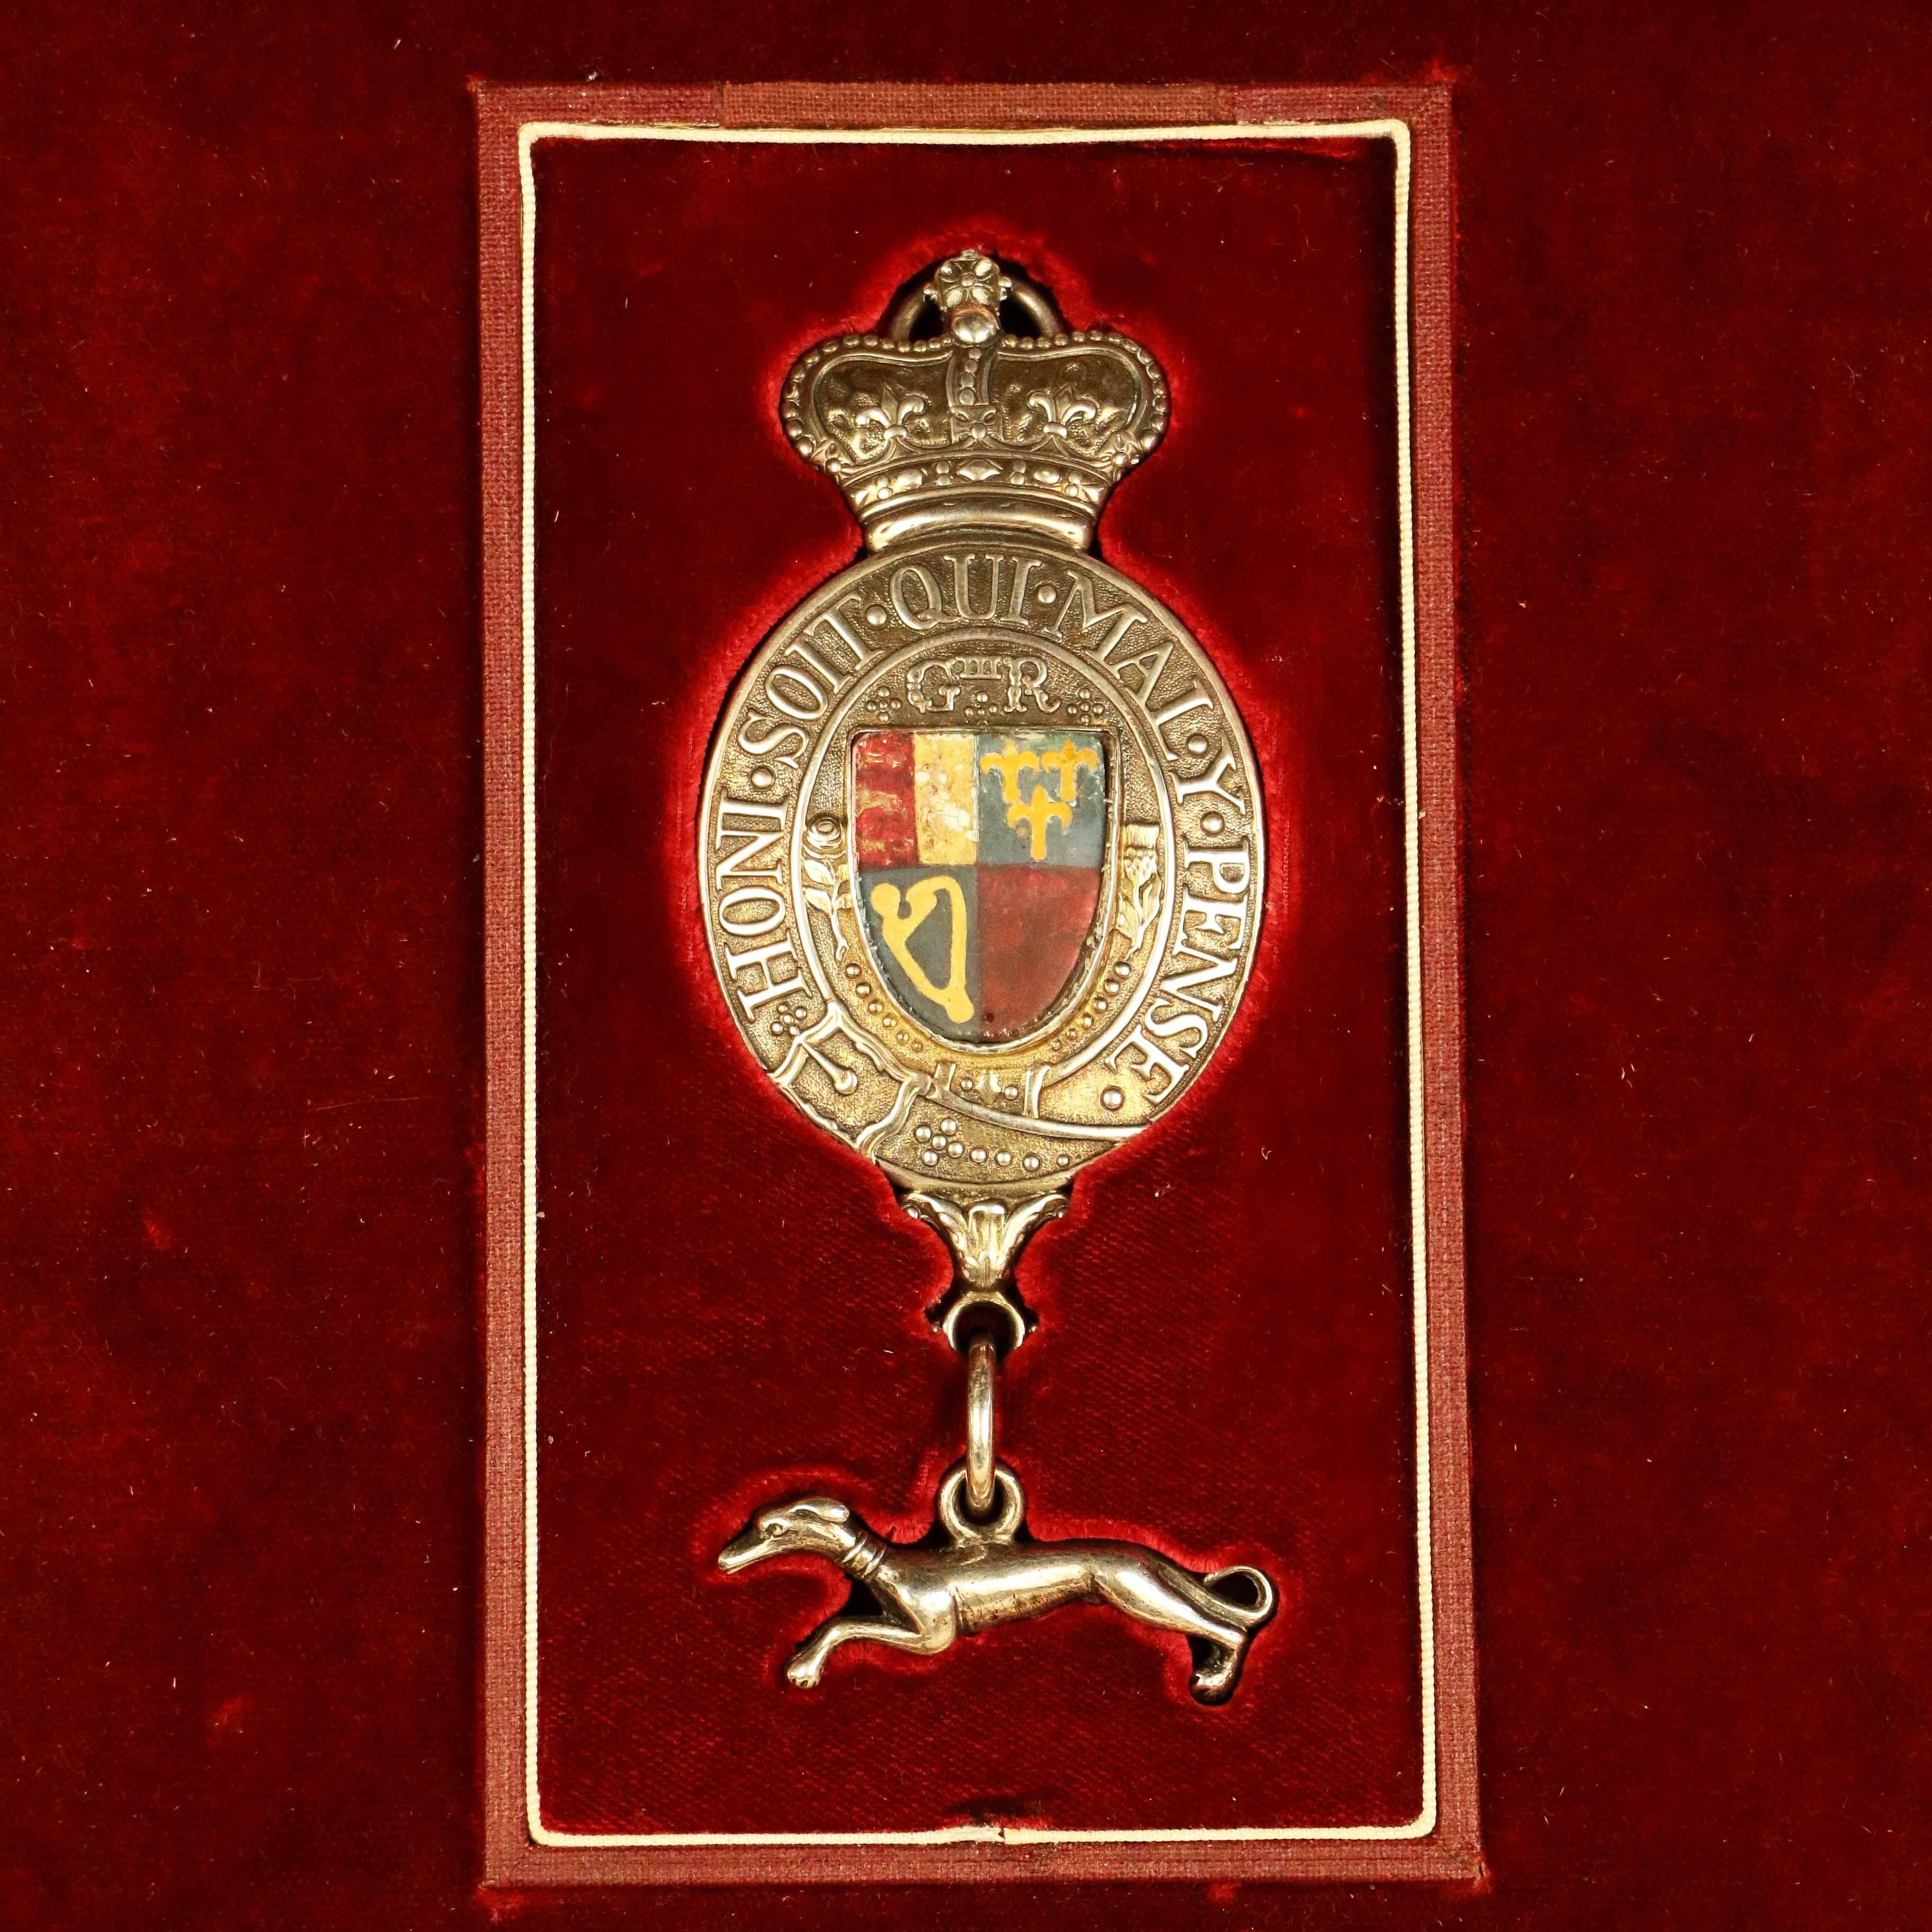 Antique King's silver messenger badge, of typical form, the heraldic shield quartered and set within the order of the Garter, with crown above G111R (for George III) and with a fleeting greyhound suspended, emblematic of swiftness.

These badges